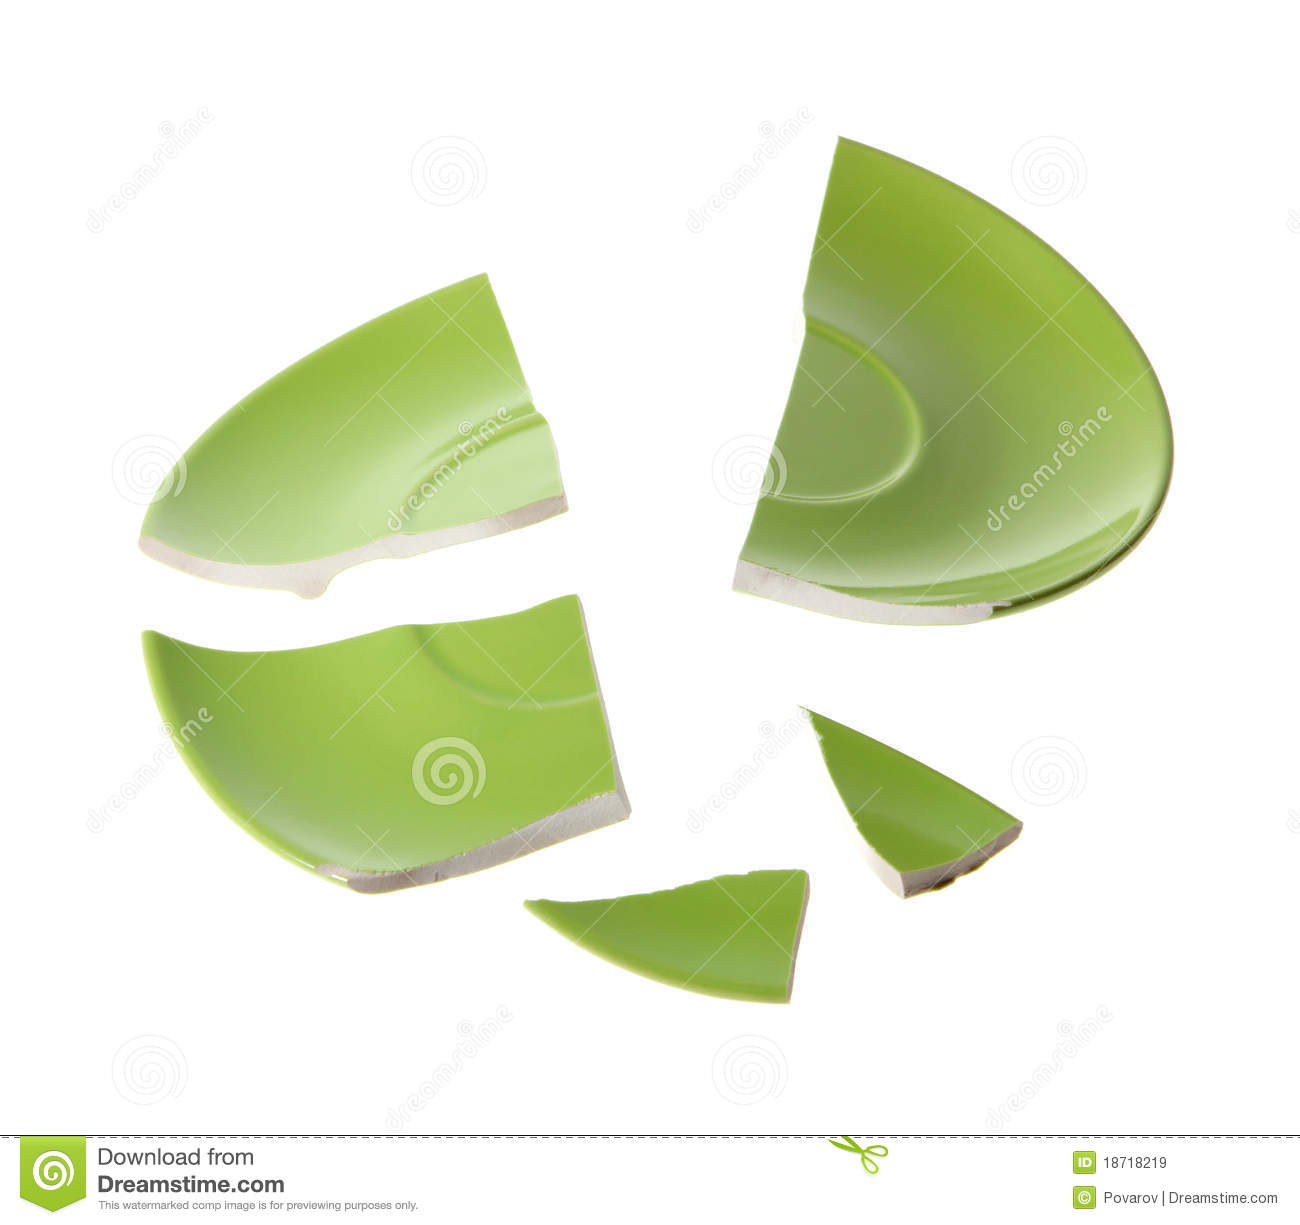 Broken Green Plate Royalty Free Stock Images   Image  18718219